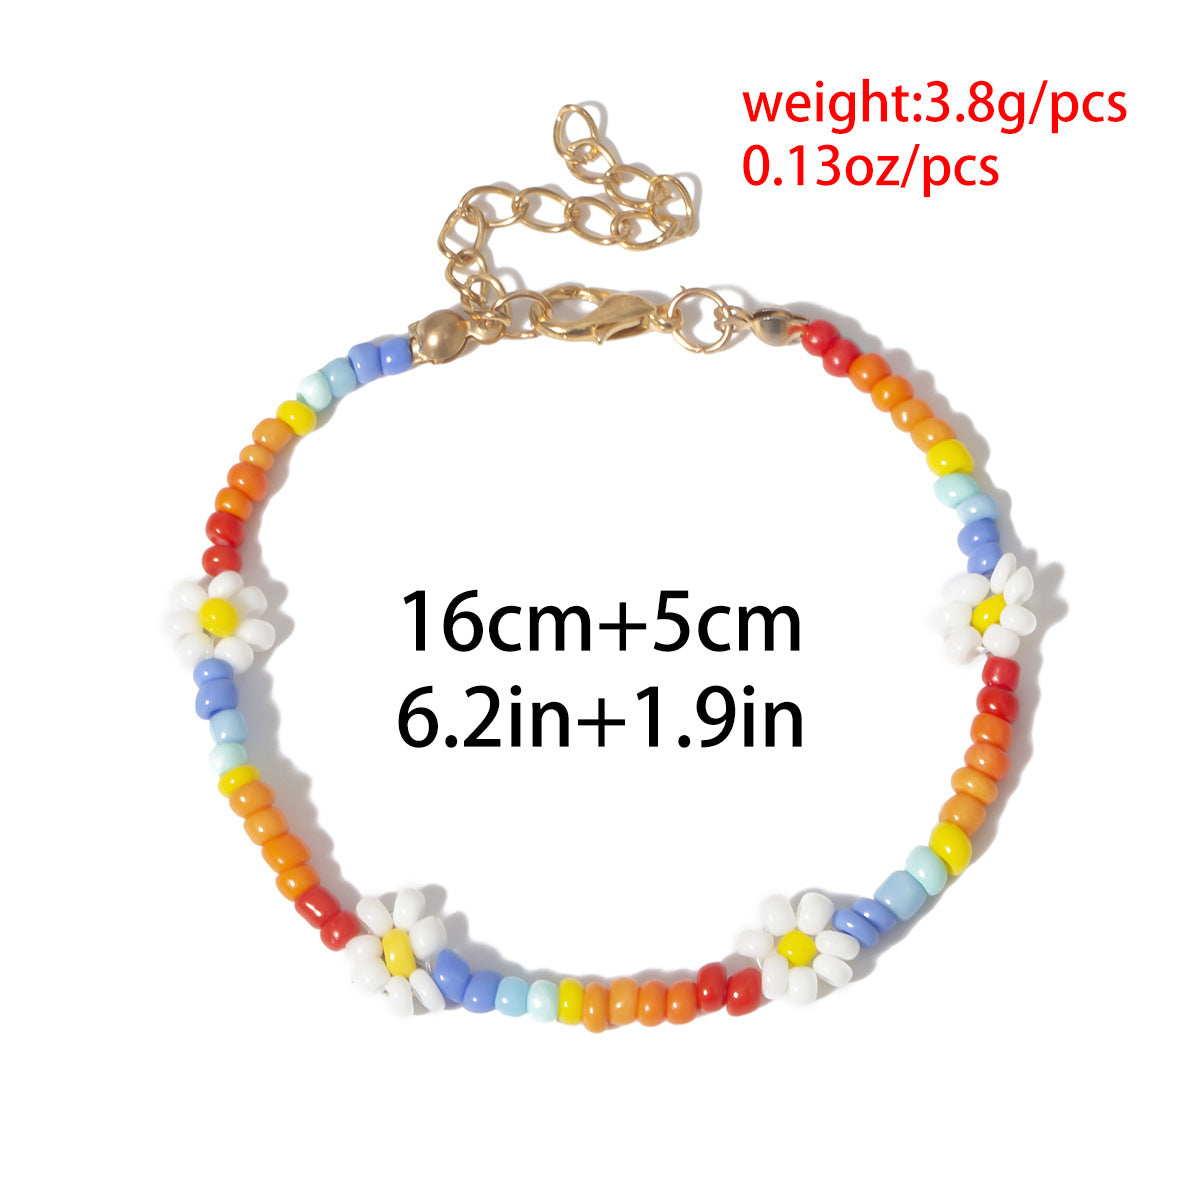 Handmade Colorful Beads String Daisy Design Necklaces for Women